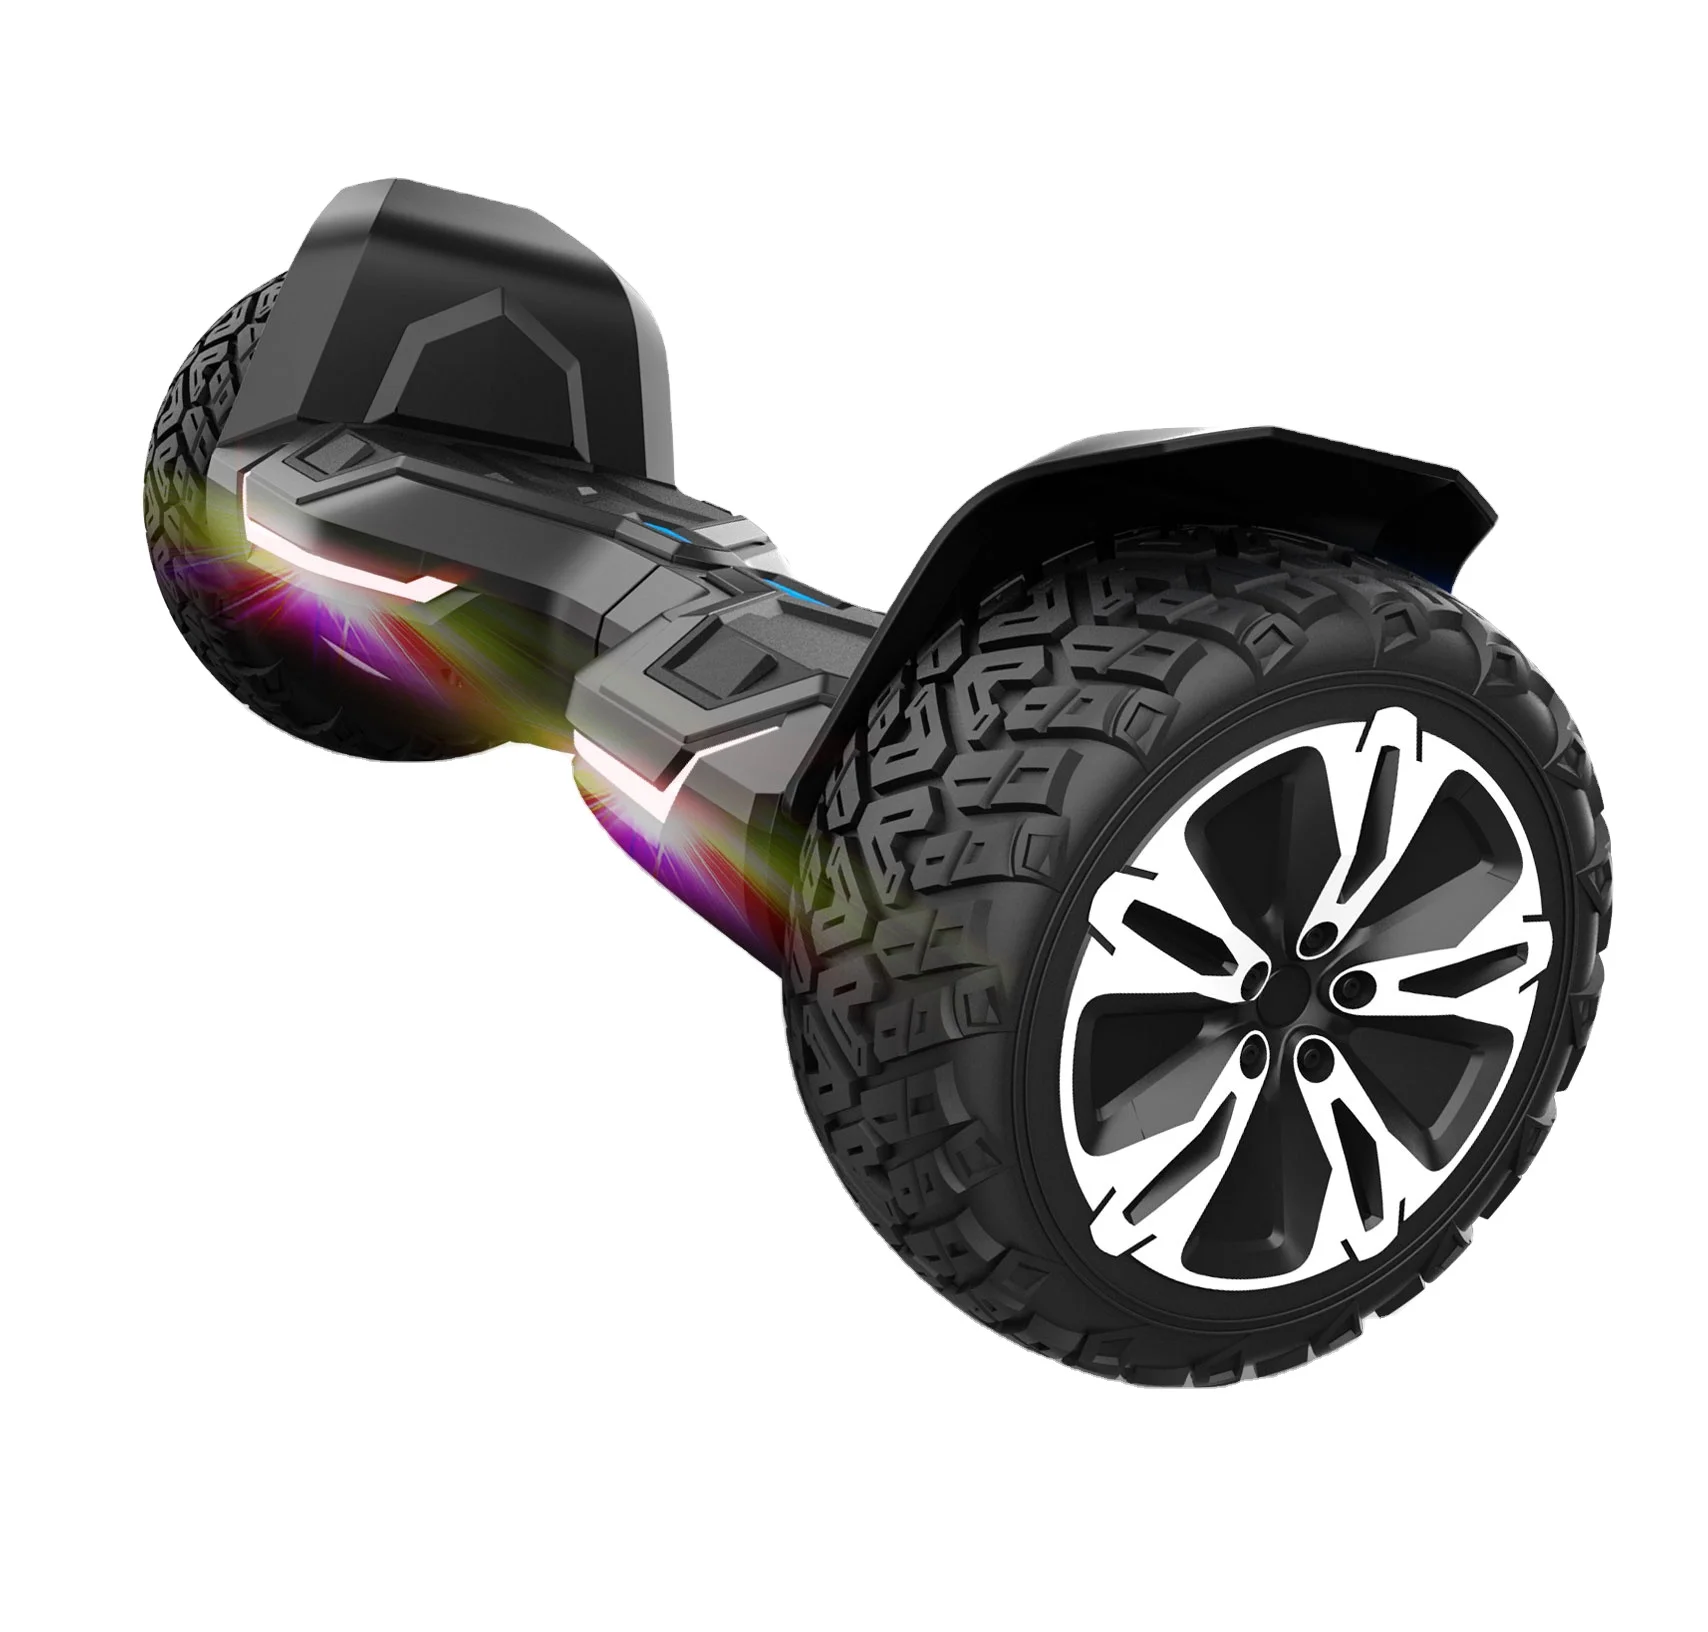 

GYROOR new cool lighting tunnel motor hoverboard two wheels self balancing electric hoverboard gyroscope hoverboard, Black/red/blue